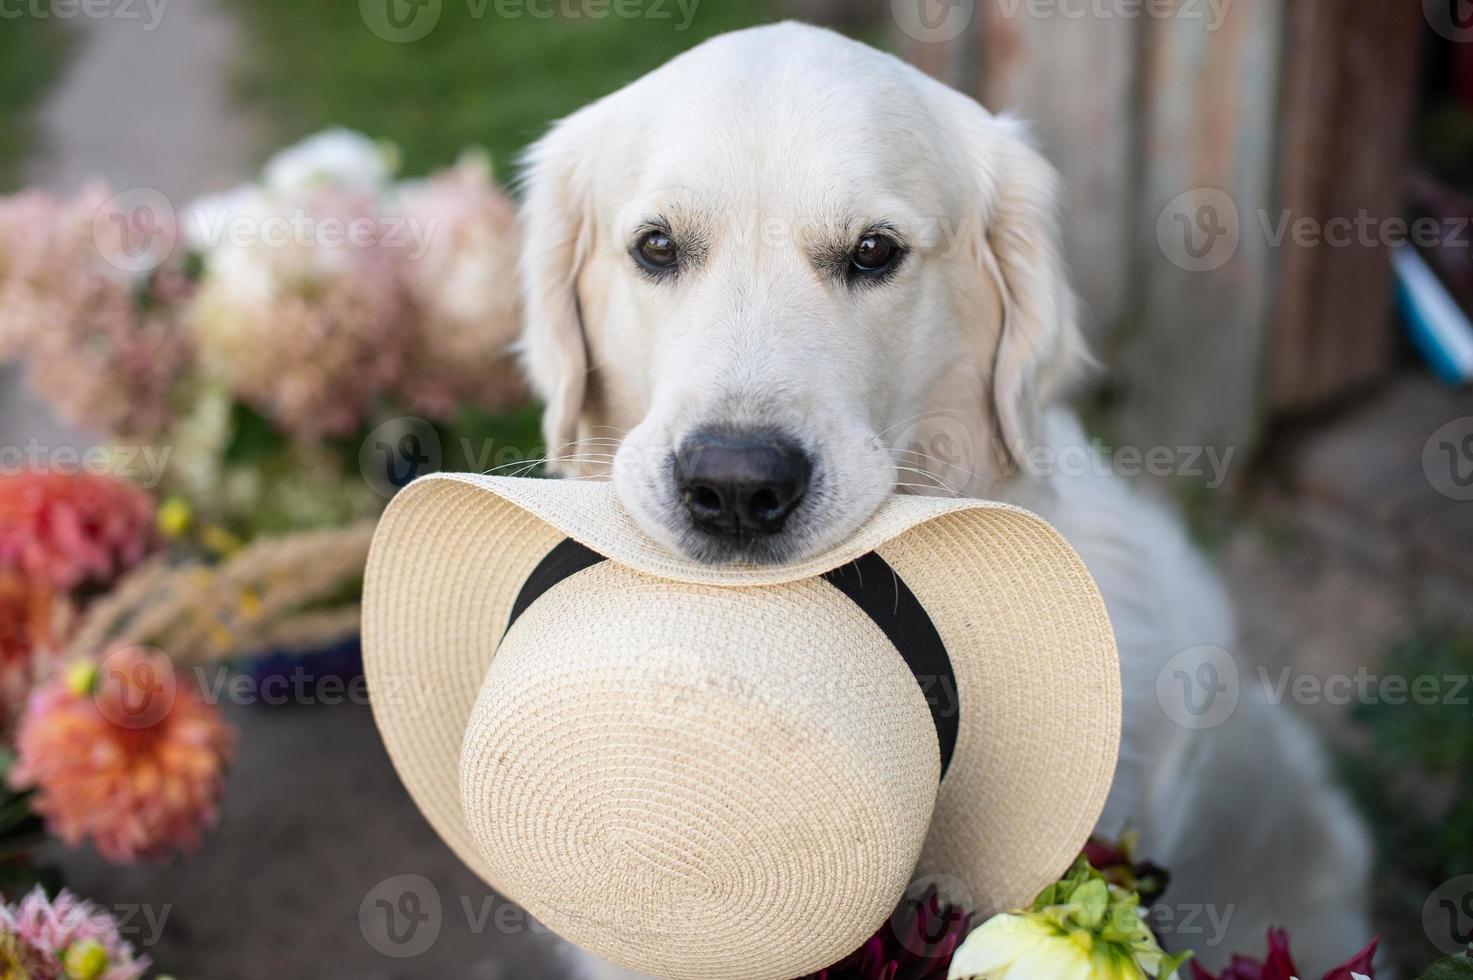 The muzzle of a Labrador retriever dog sits near flowers and holds a hat in his teeth photo